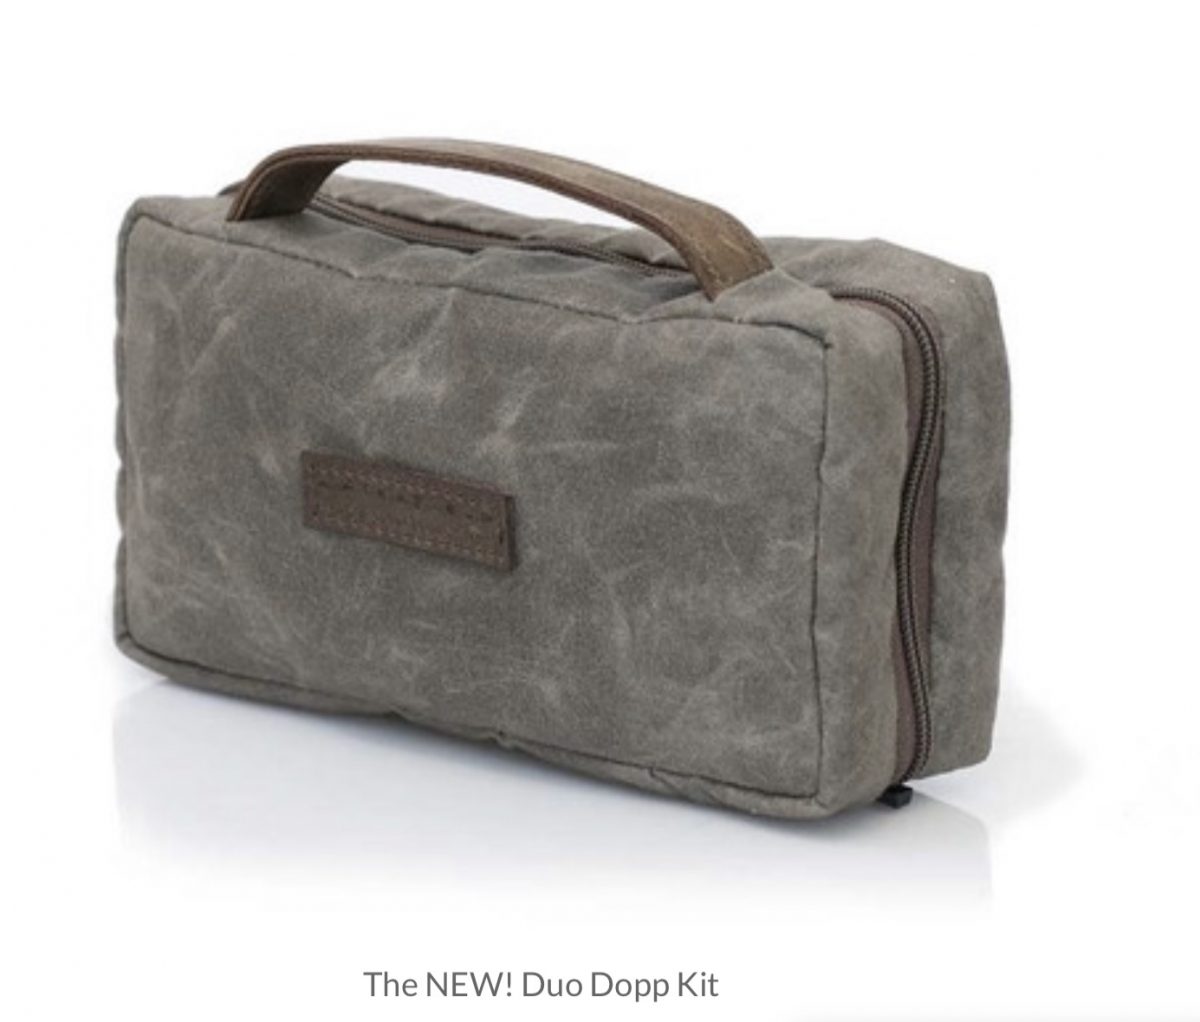 The WaterField Designs Duo Dopp Kit Is a Great Father's Day (or Self's Day) Gift